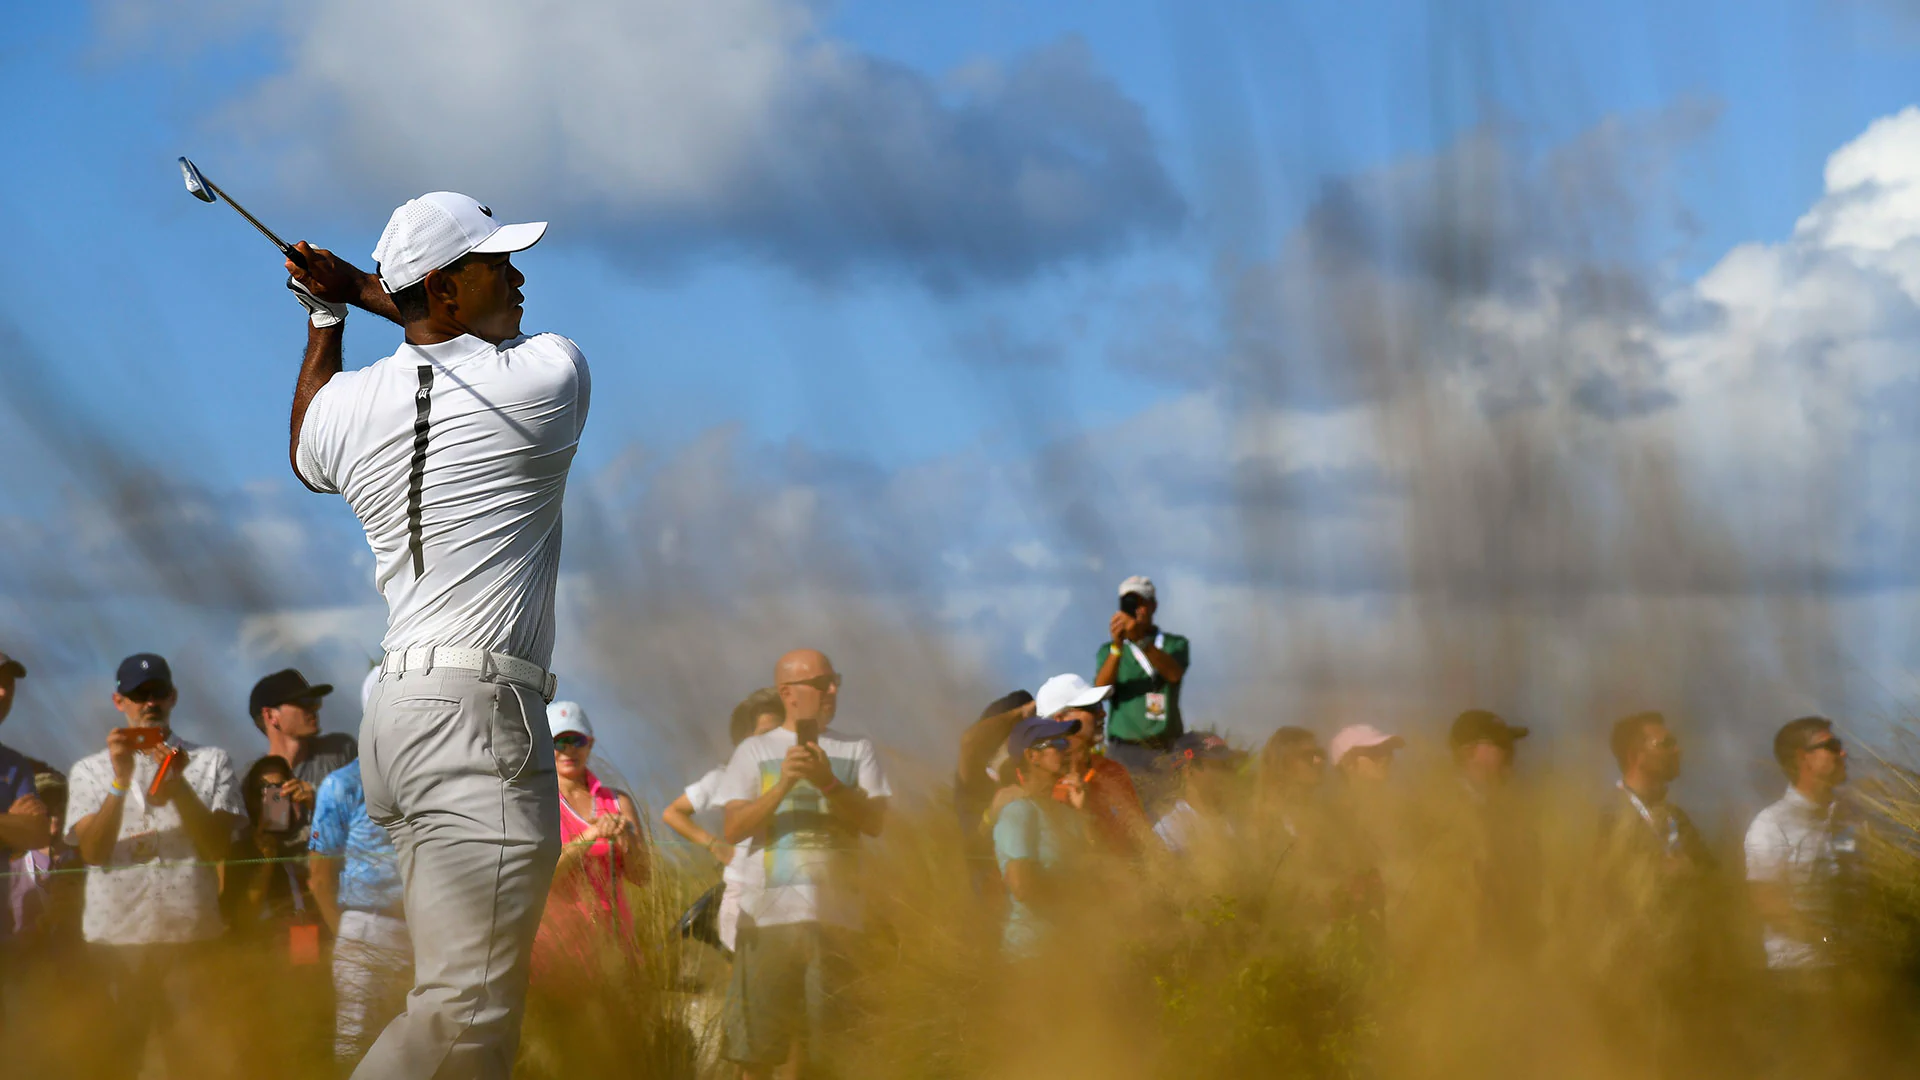 Woods on his back: 'No issues at all, none'